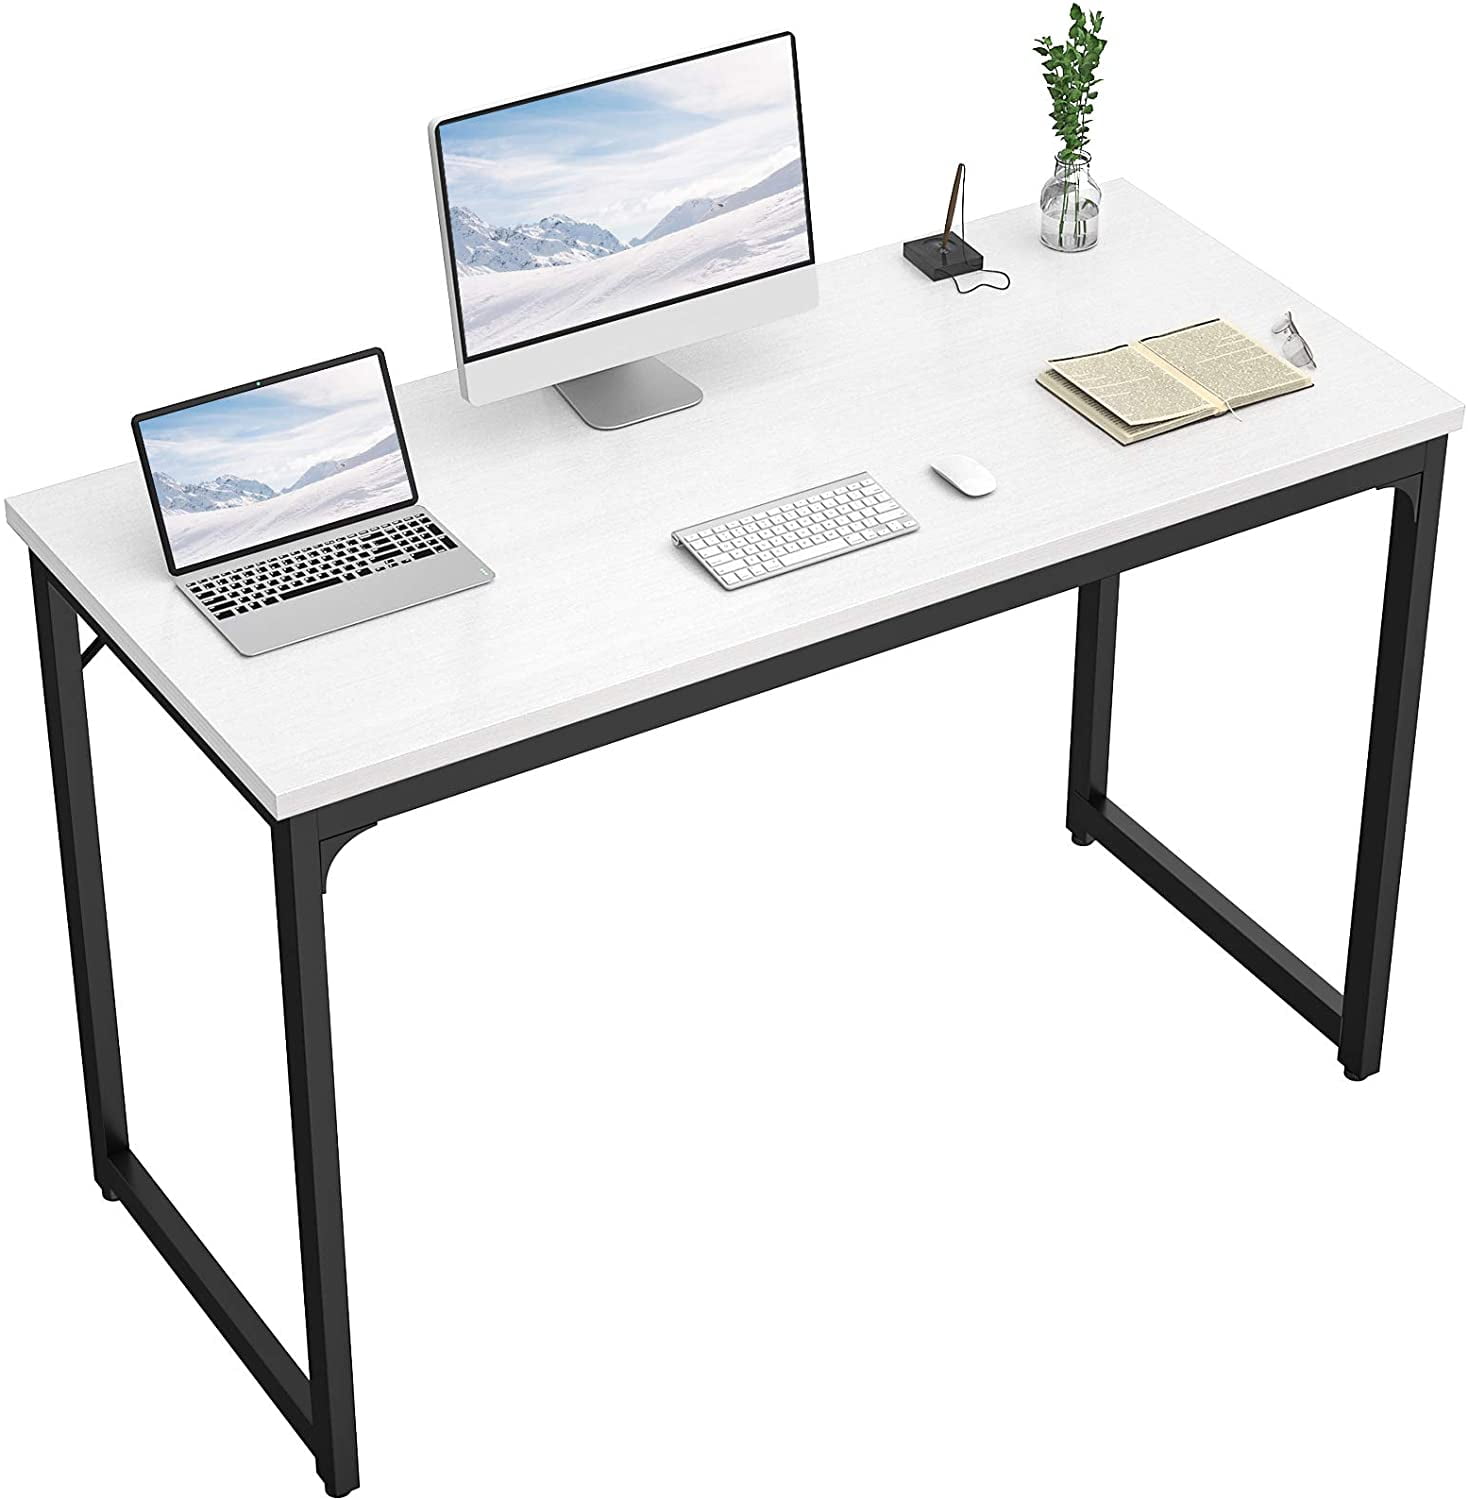 Foxemart Writing Computer Table Modern Sturdy Office Desk 32 PC Laptop Notebook Study Desk for Home Office Workstation Black 